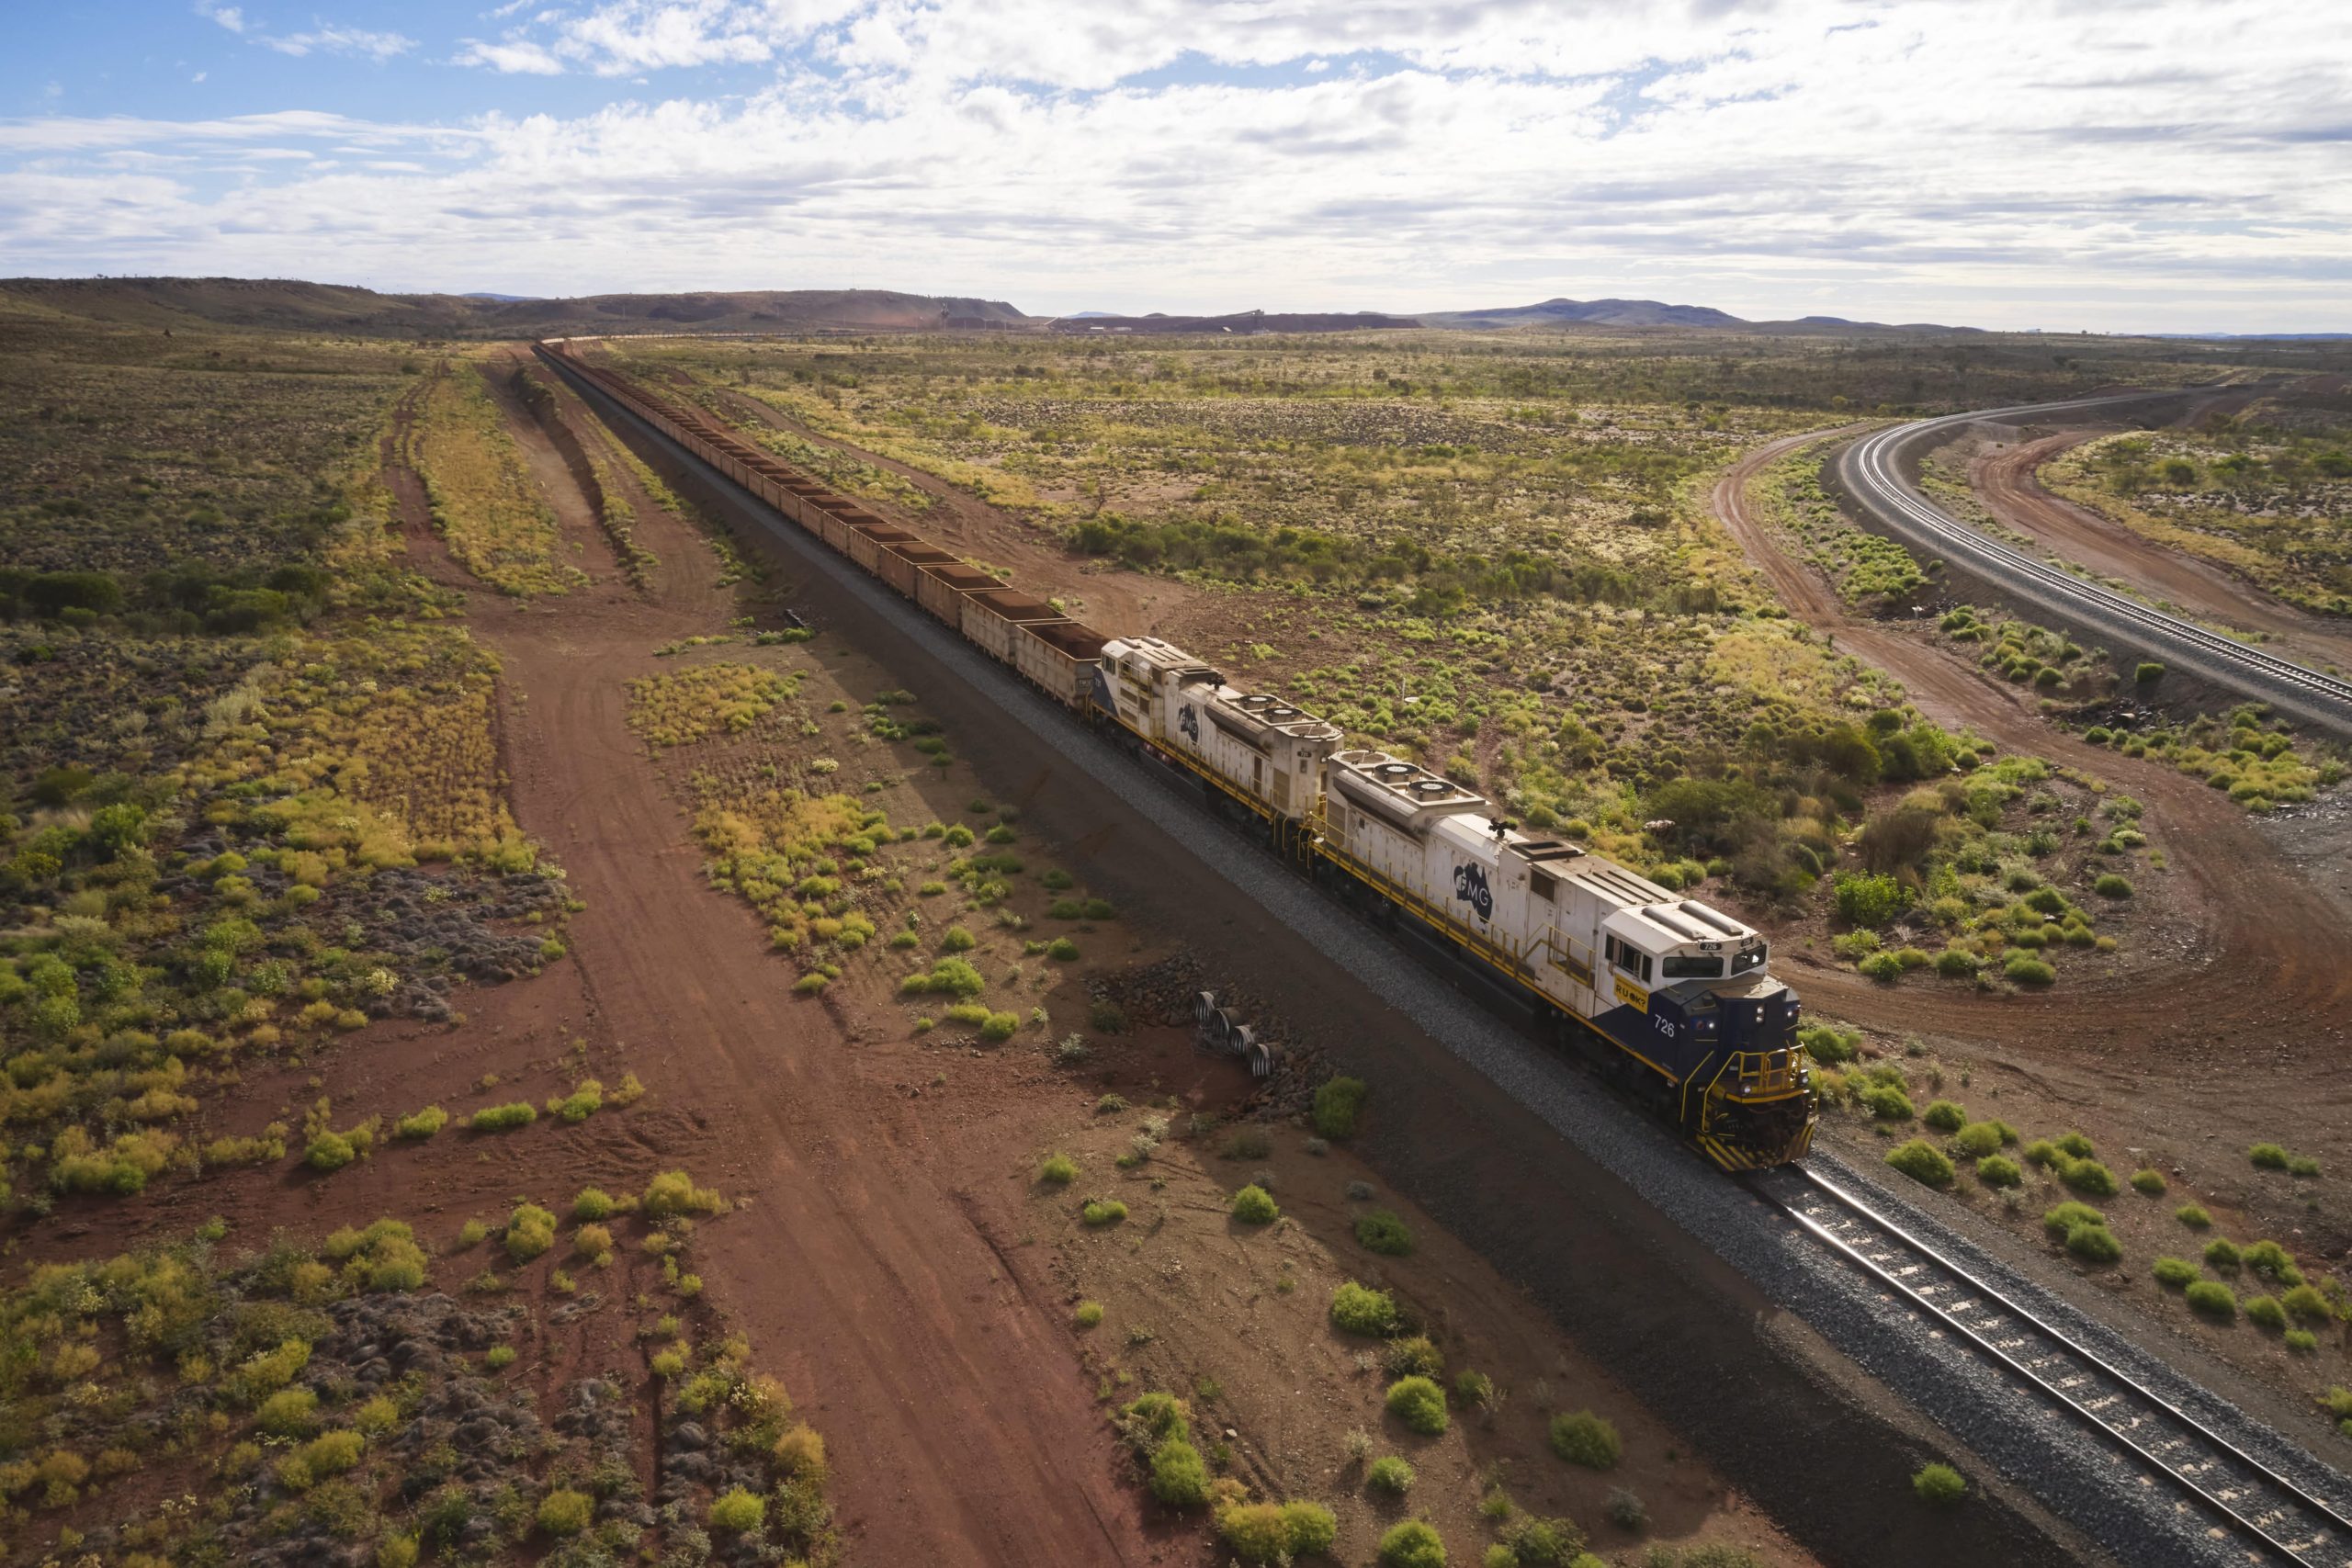 Fortescue buys Williams Advanced Engineering and announces world’s first infinity train